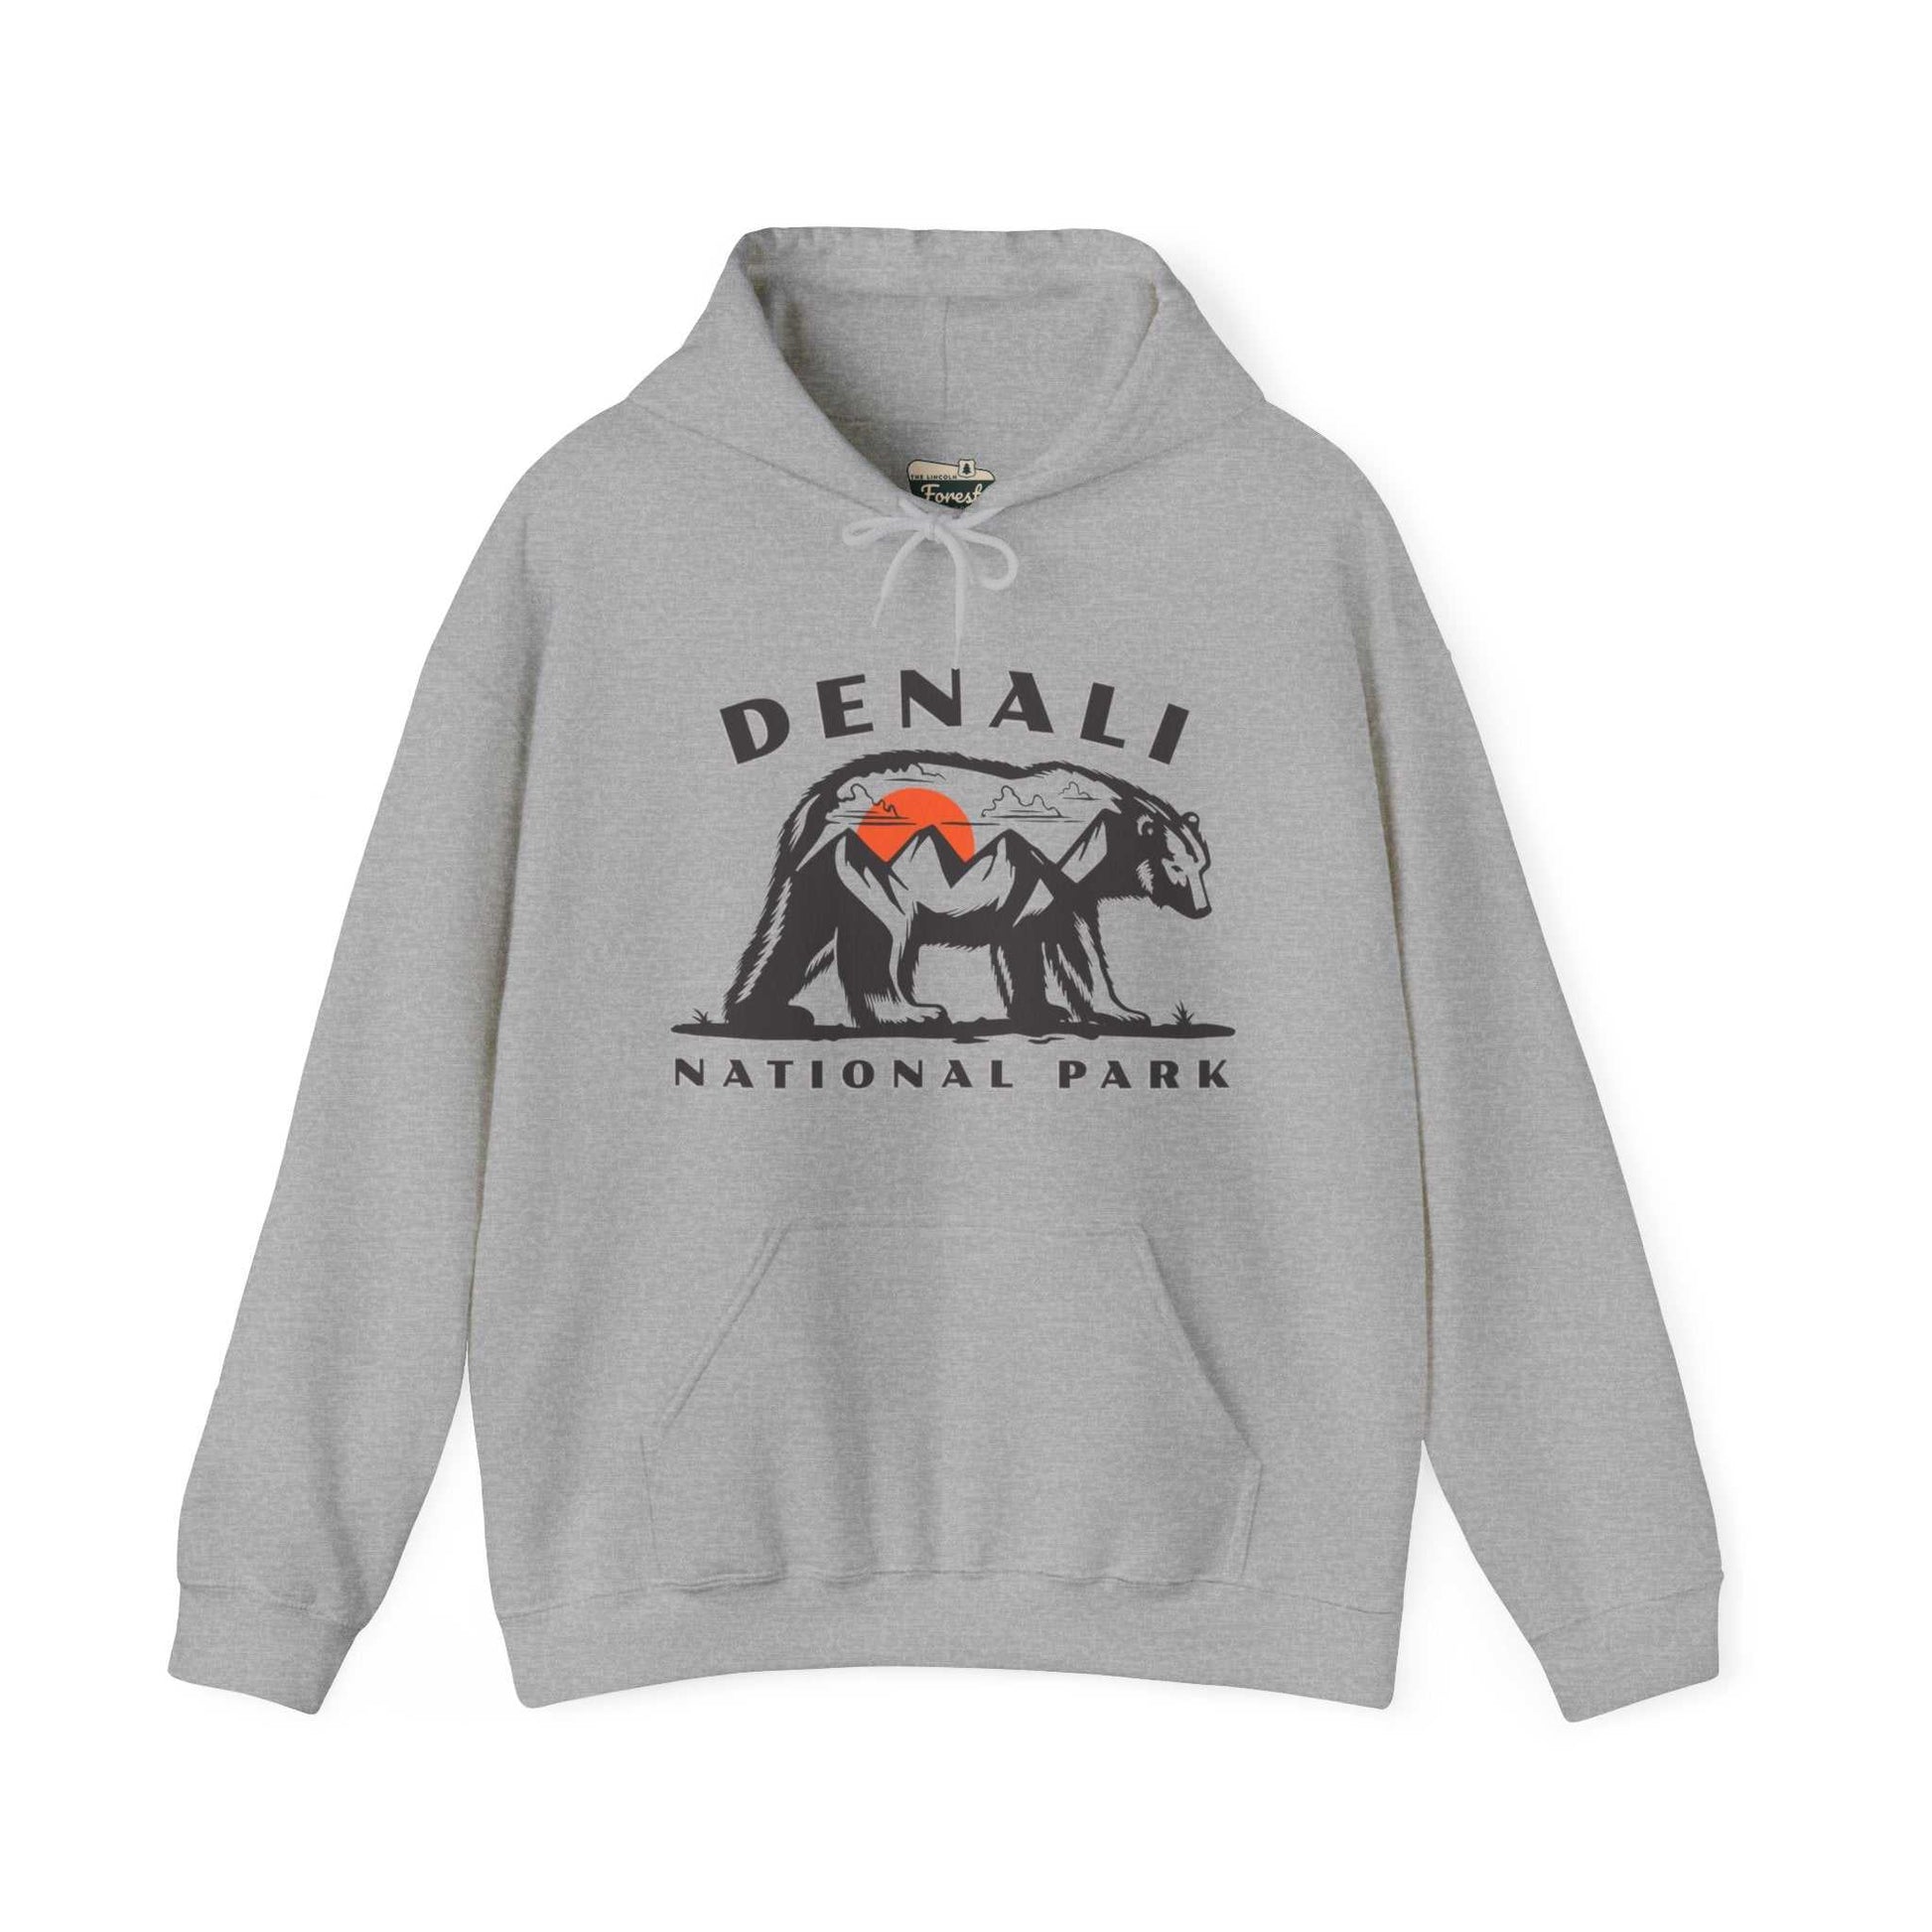 Denali National Park SweatshirtStay cozy like a hibernating grizzly bear in this Denali National Park hoodie or crewneck. 
Details:
- unisex sizing- ultra soft inside- size up twice for an oversiz